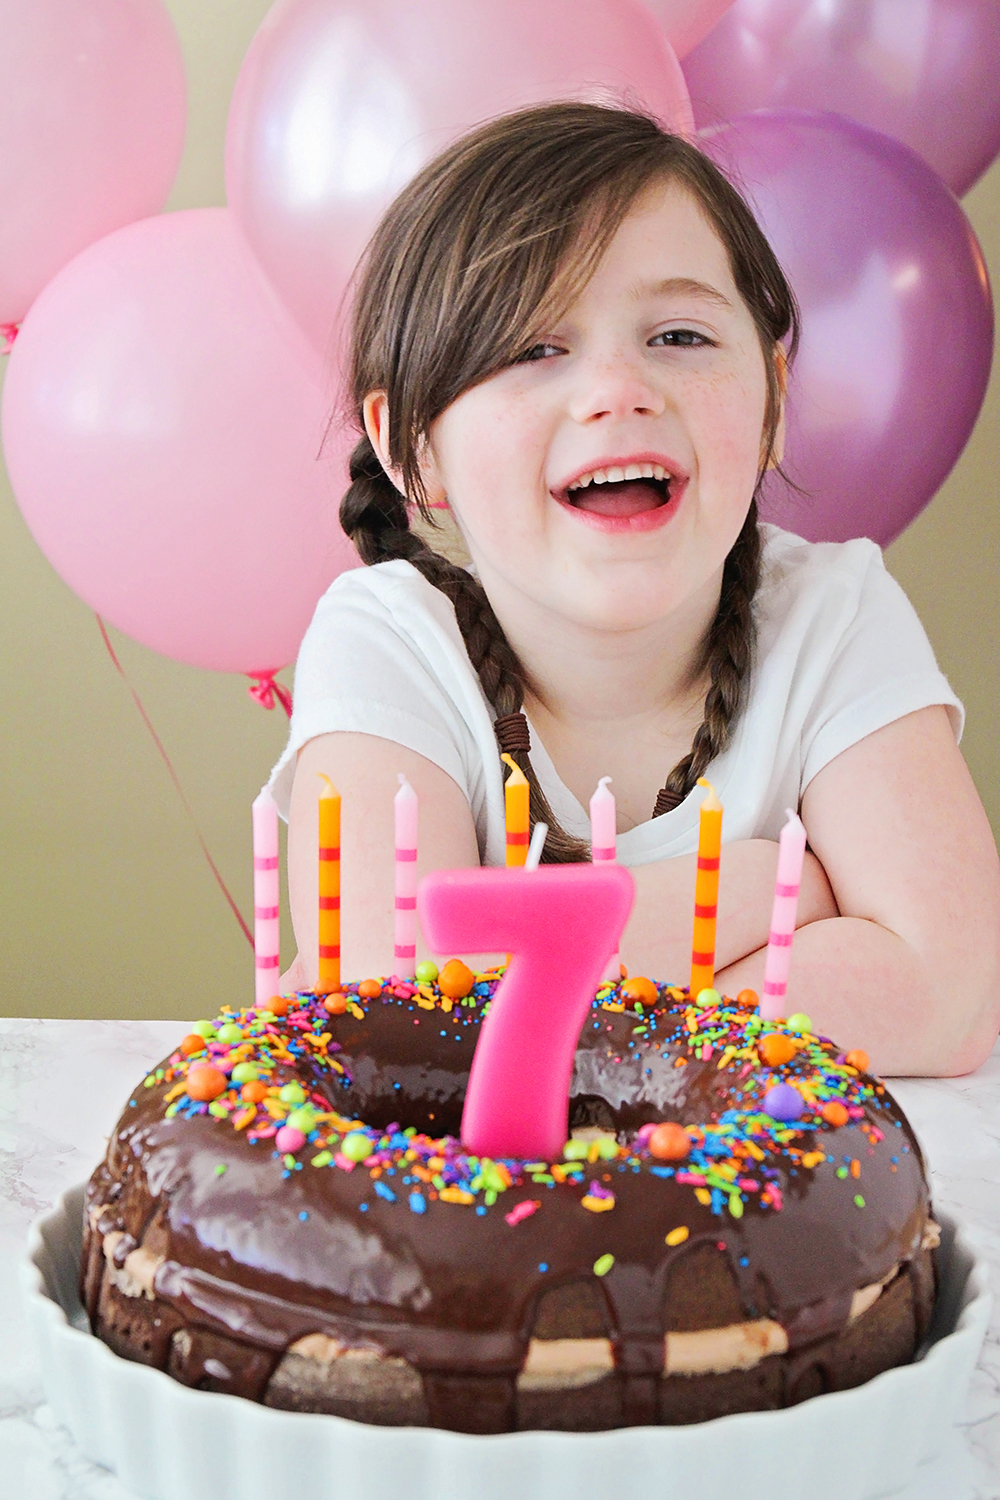 This fun and whimsical chocolate donut birthday cake is so delicious and indulgent!